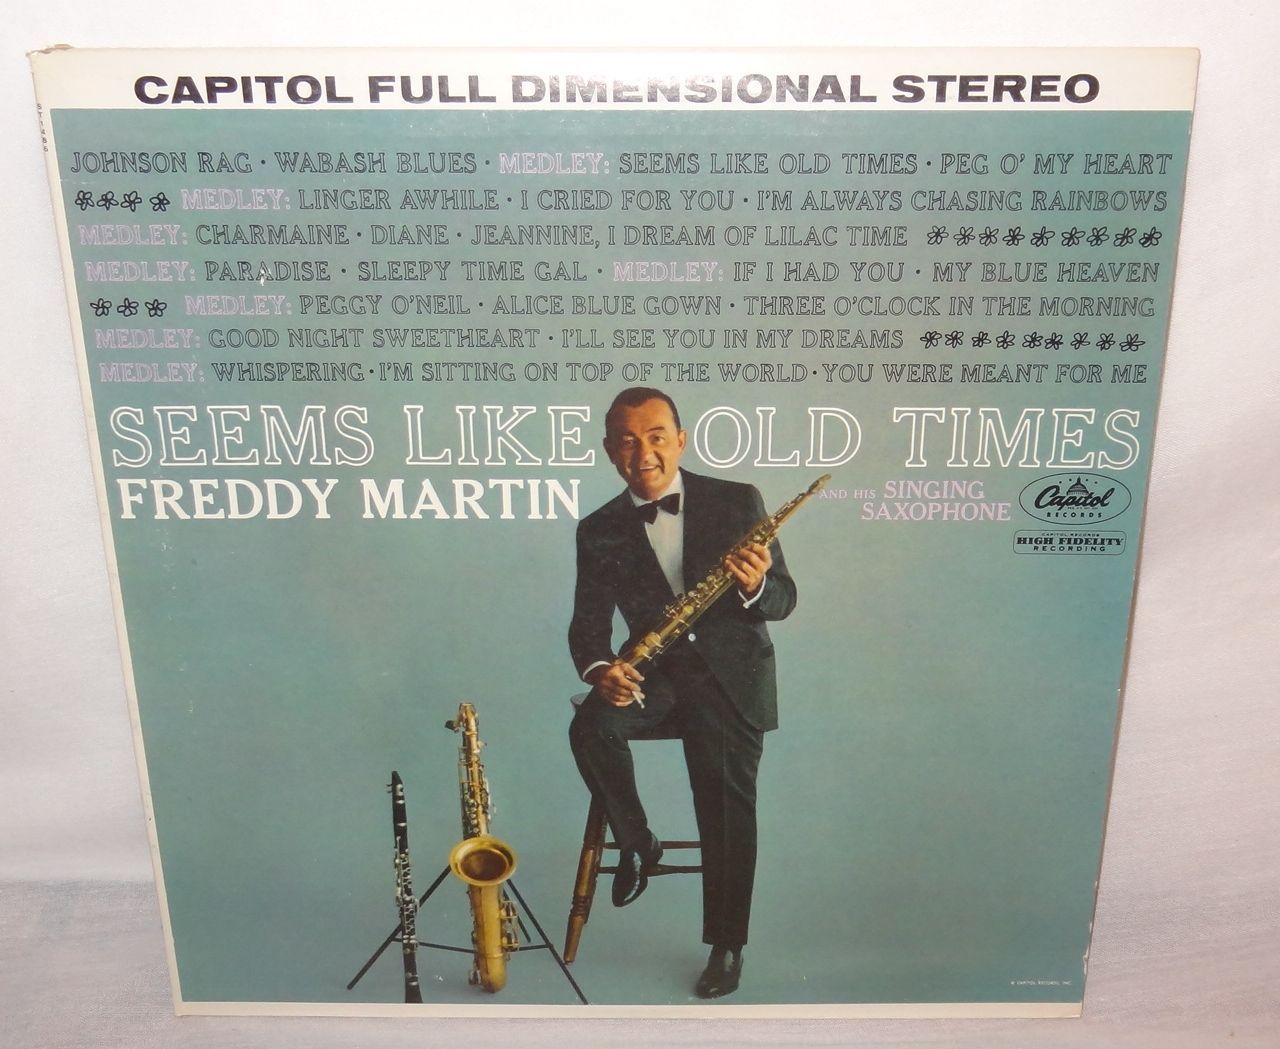 Primary image for VTG Freddy Martin (Seems like old times) Singing Saxophone Capitol Records